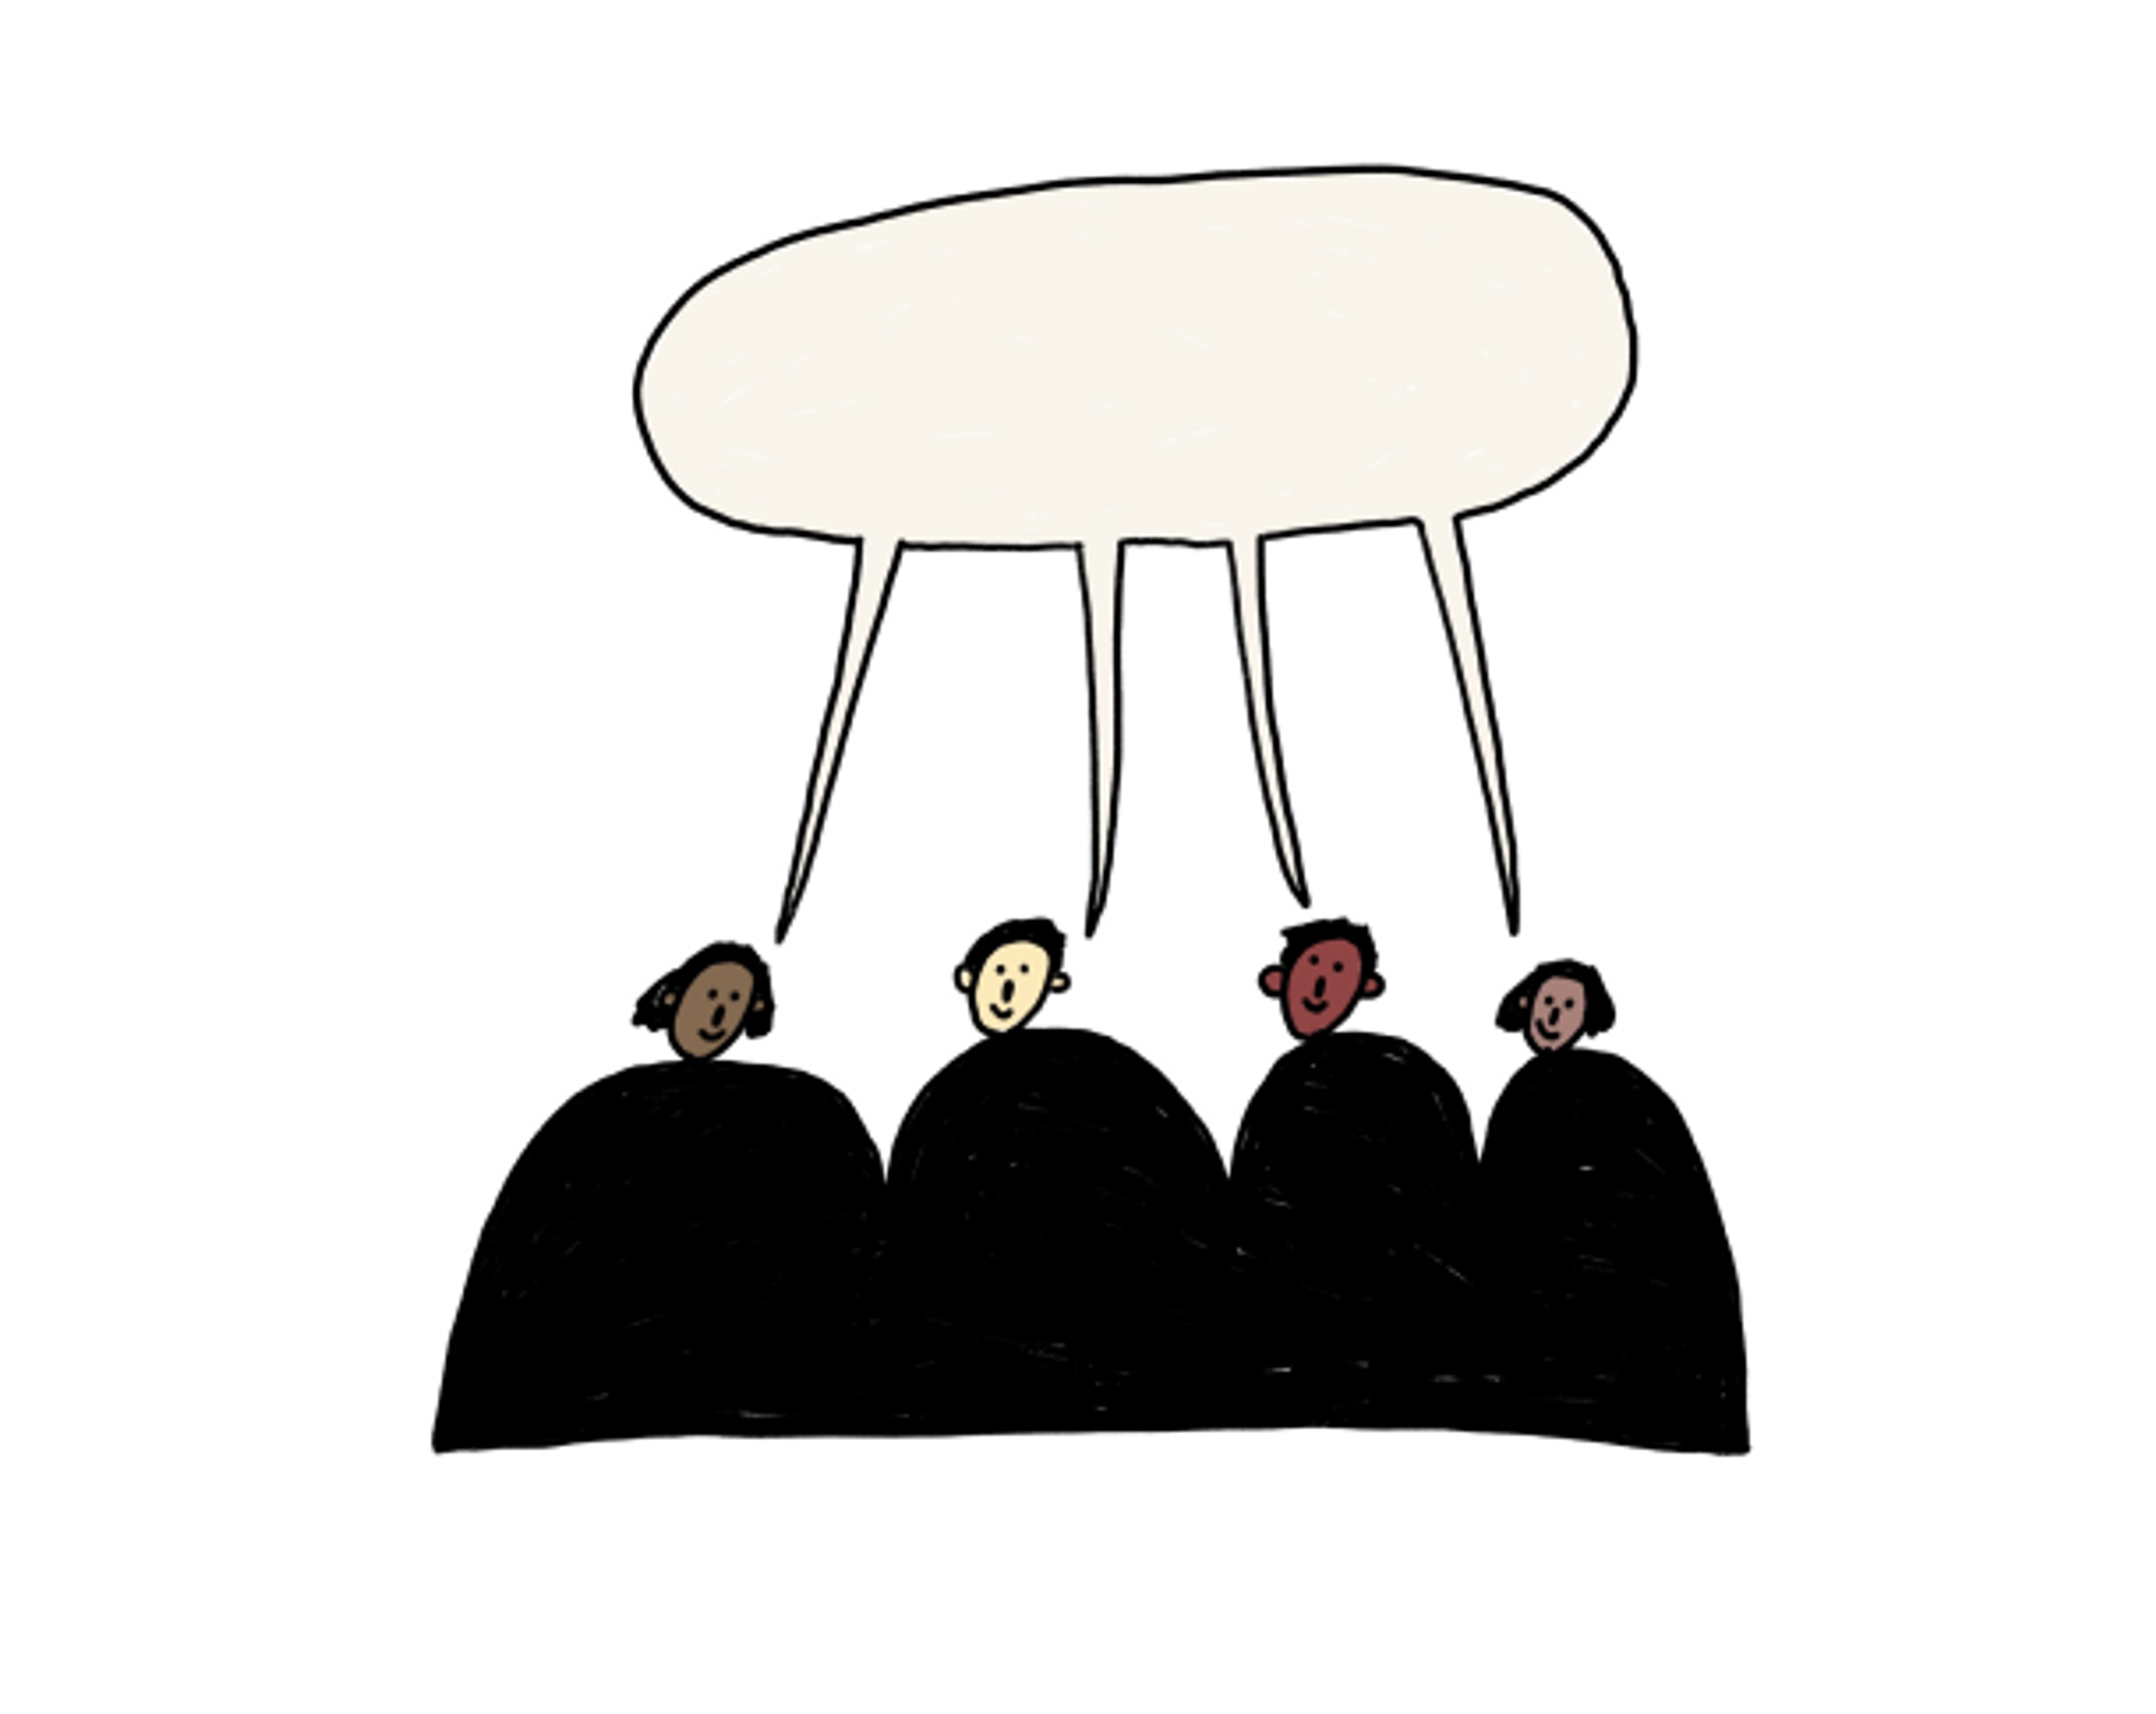 Illustration showing four people sharing a speech bubble.